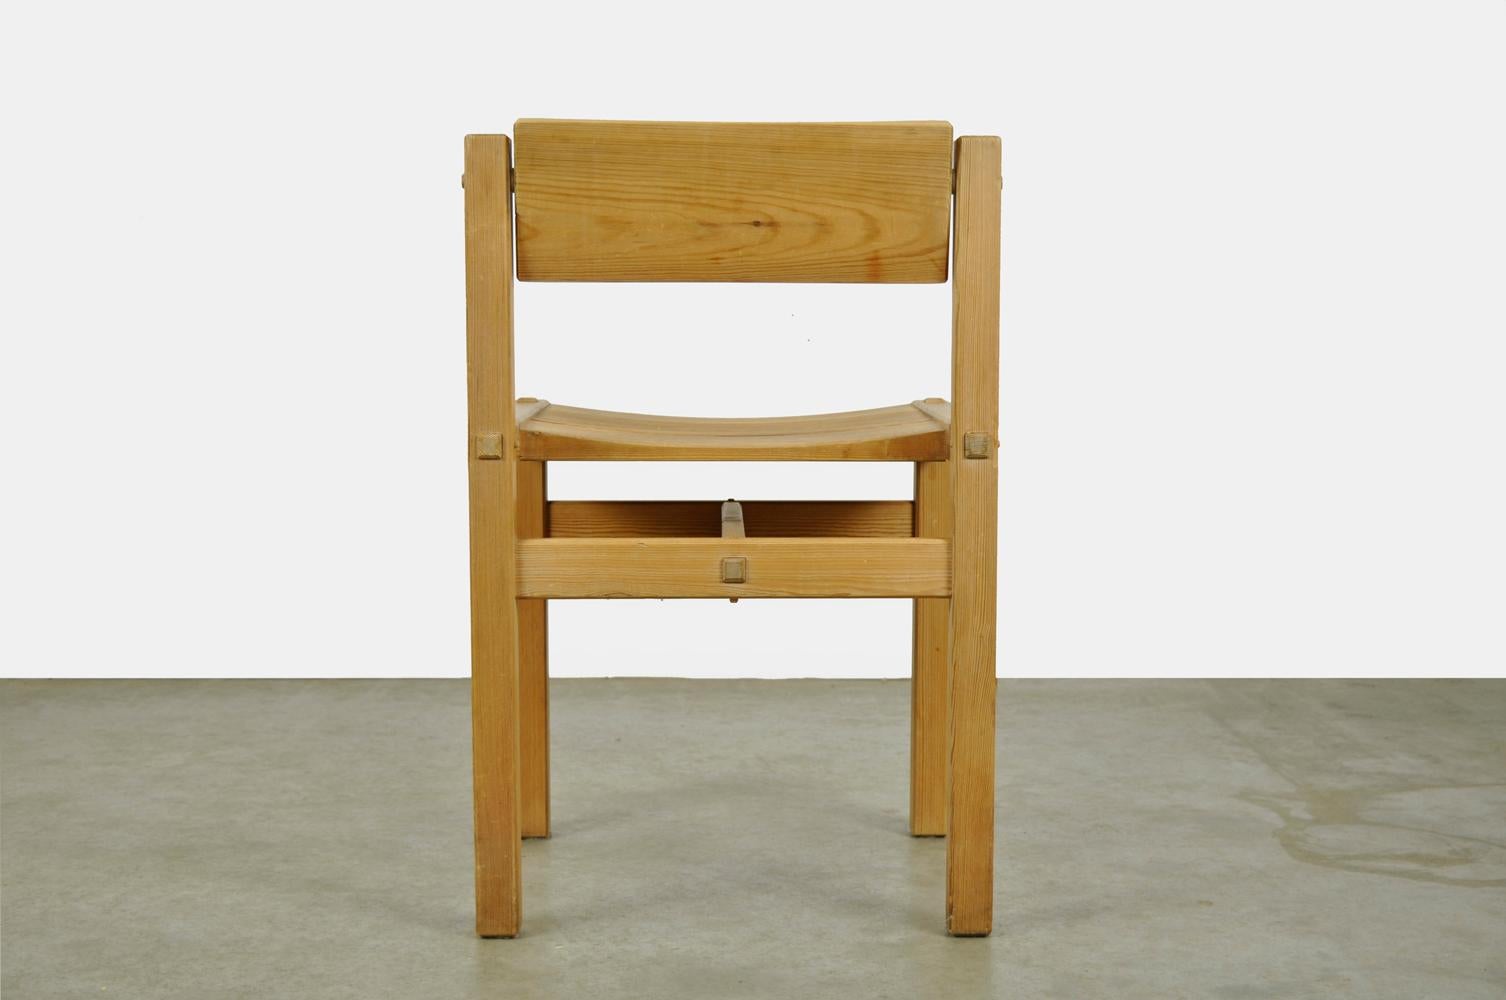 Trybo pine dining chairs (4) by Edvin Helseth for Stange Bruk, Norway 1960s For Sale 9